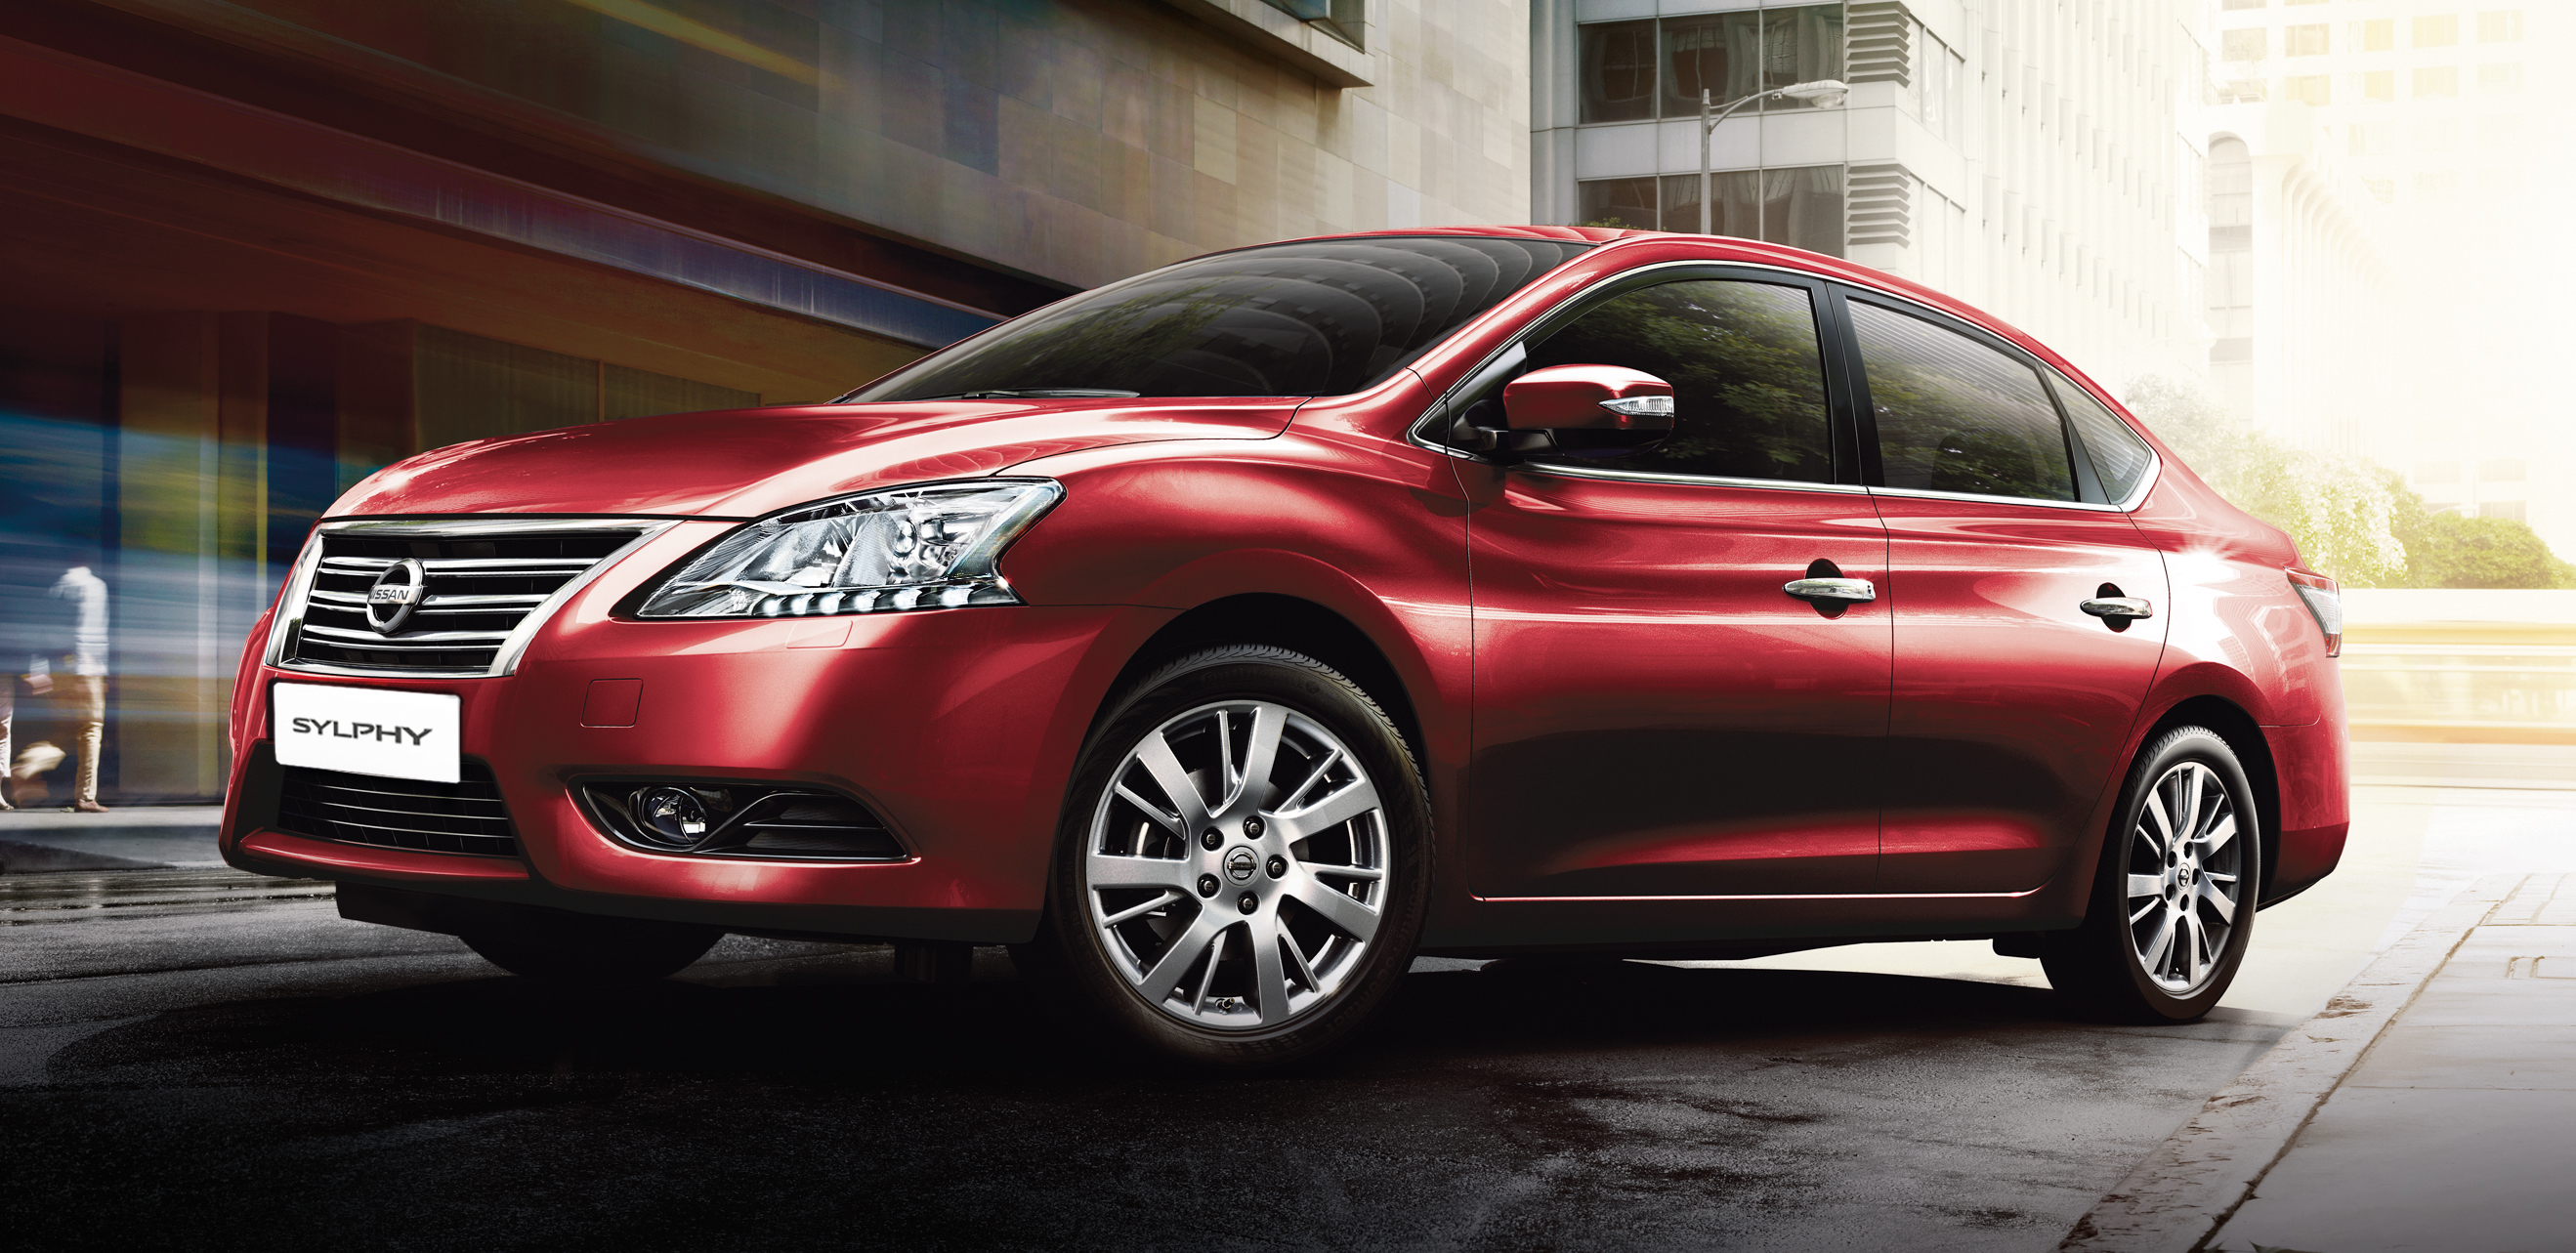 New Nissan Sylphy open for booking in Malaysia! New_Nissan_Sylphy_01